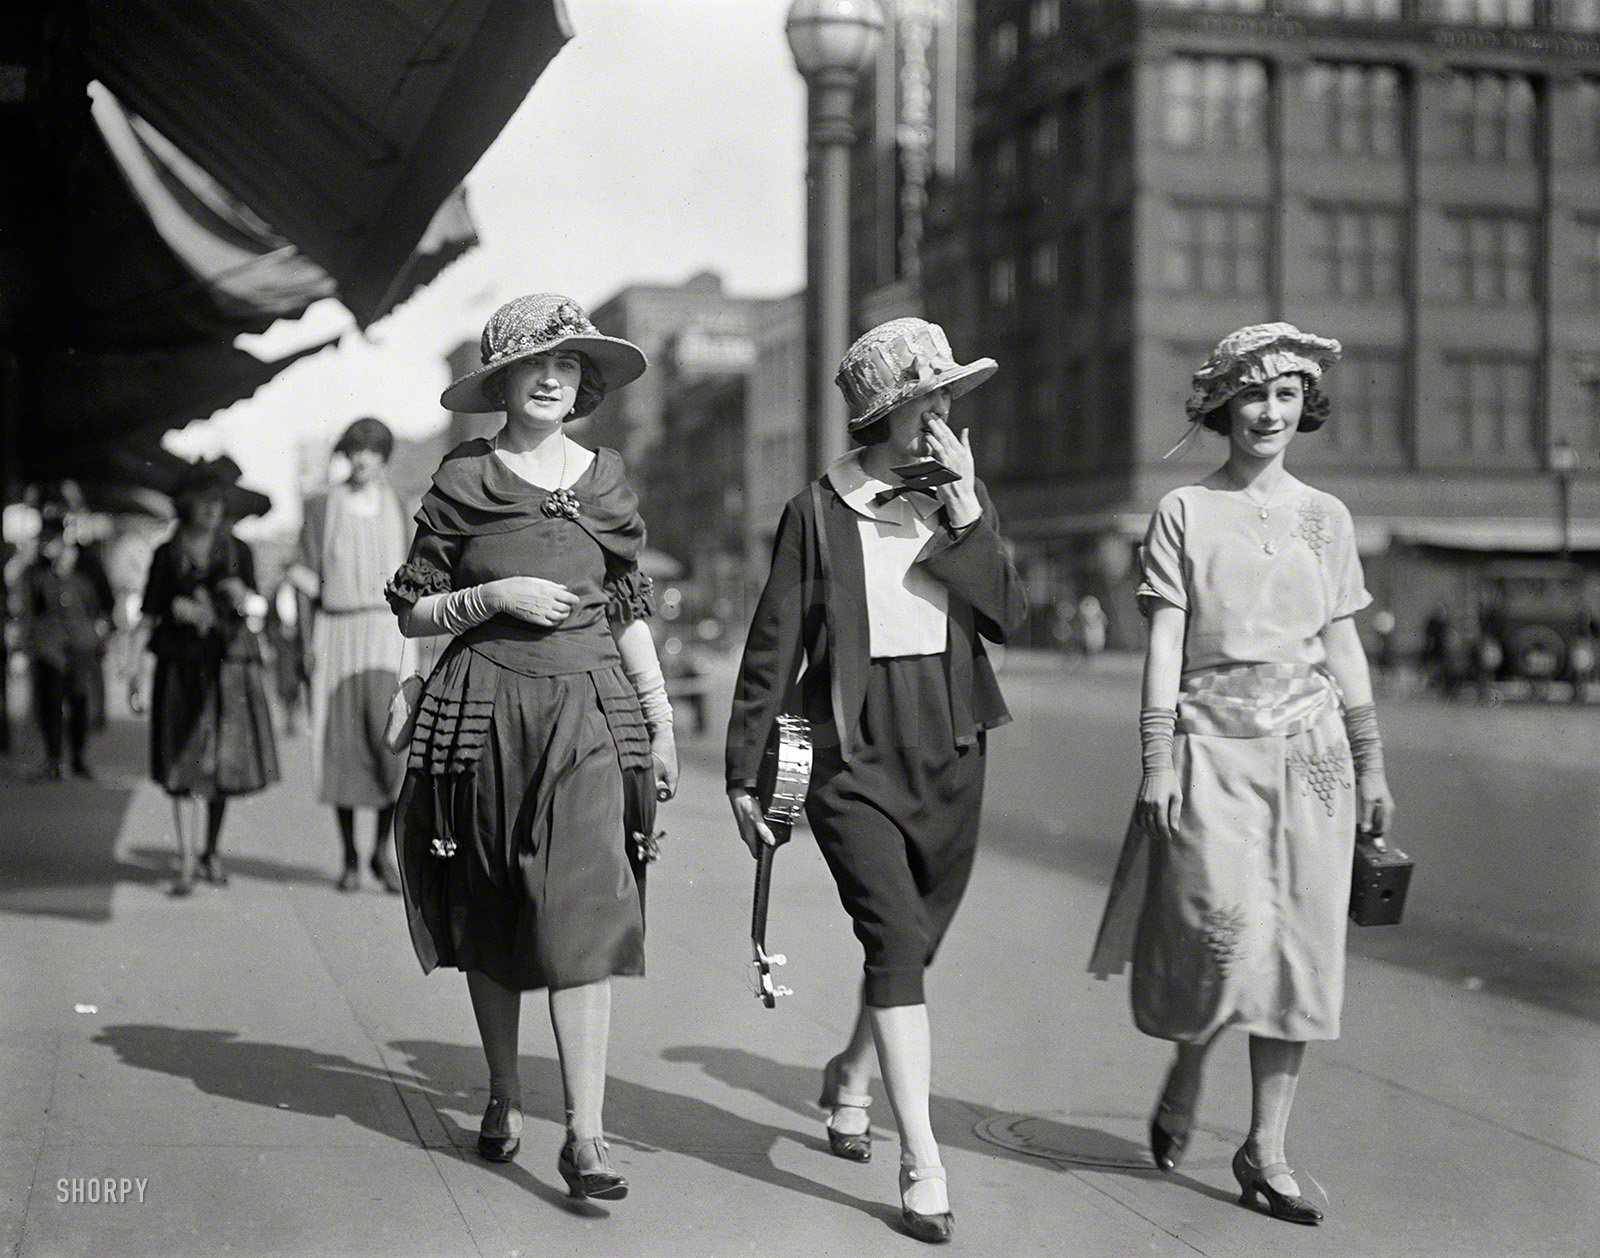 Washington, D.C., 1922. "NO CAPTION (women on street)." One in a series showing spring fashions at Easter. This trio is going places with a camera and a banjo. Harris & Ewing Collection glass negative. View full size.